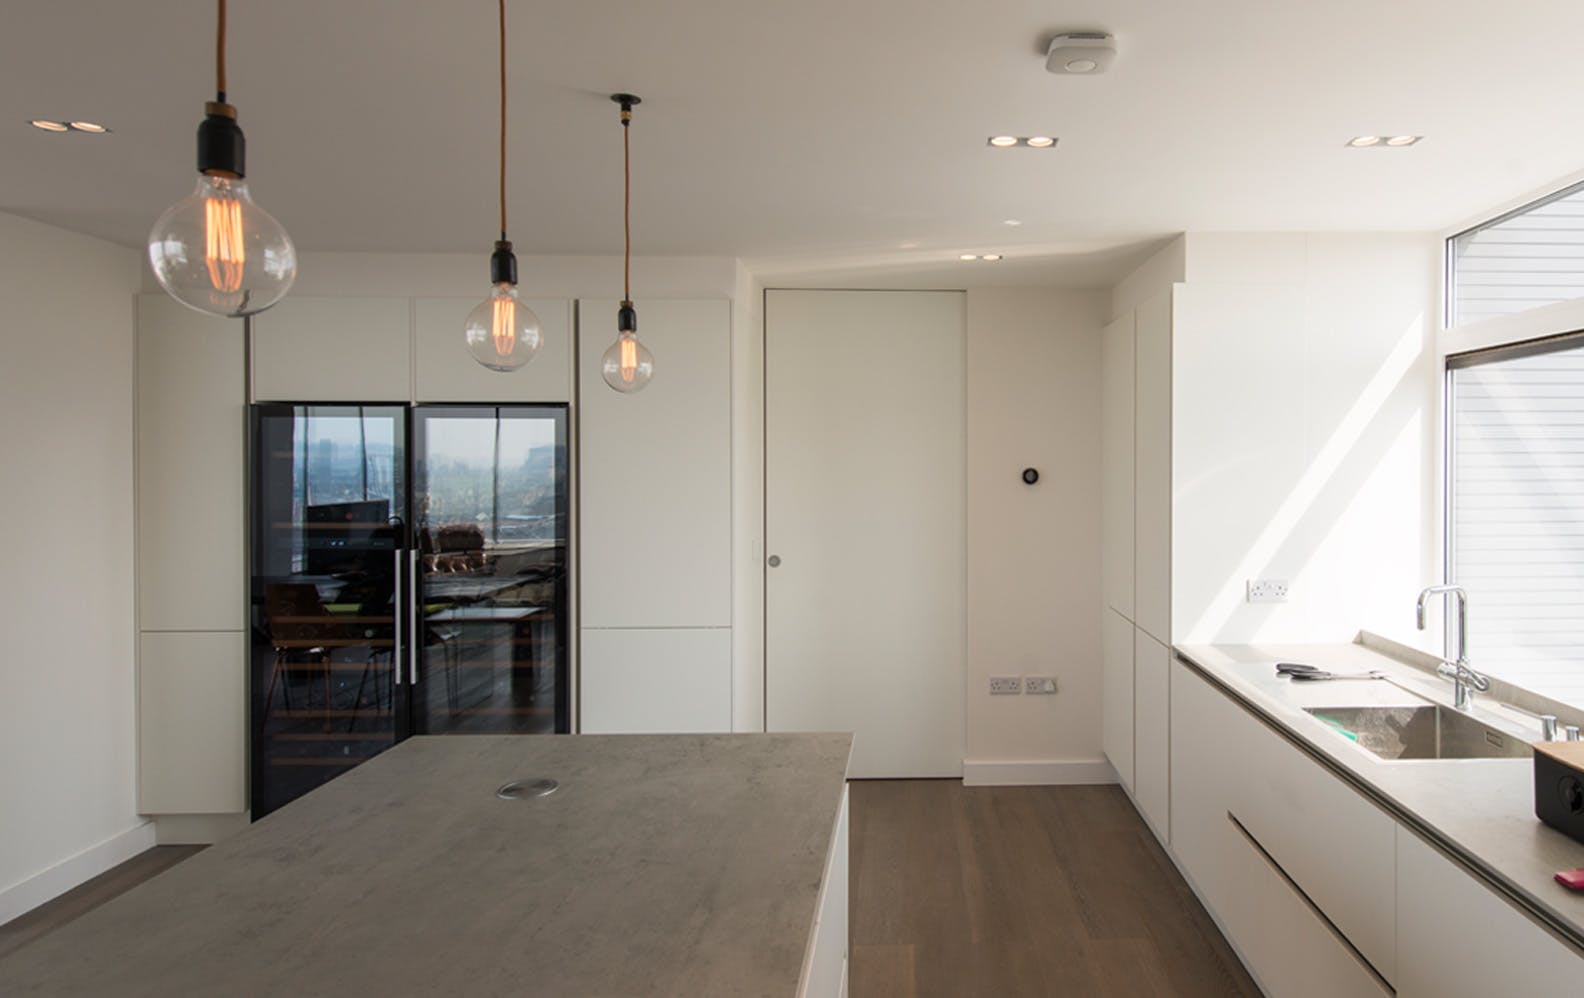 White, contemporary kitchen with a Deuren, full height pocket door - Trem, painted white. Door is closed.